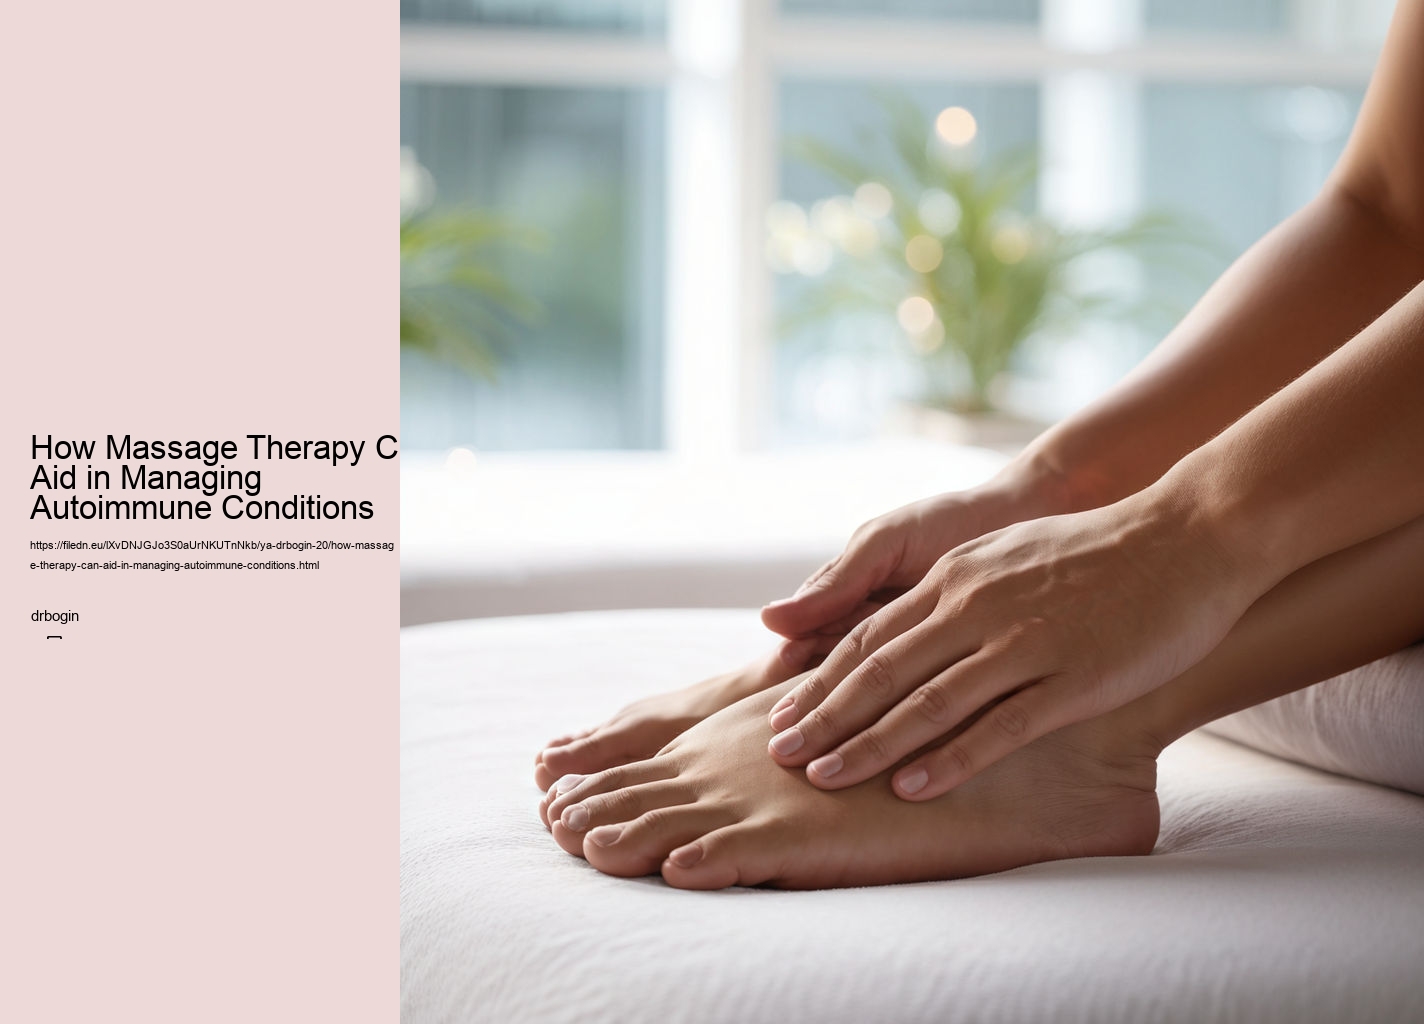 How Massage Therapy Can Aid in Managing Autoimmune Conditions